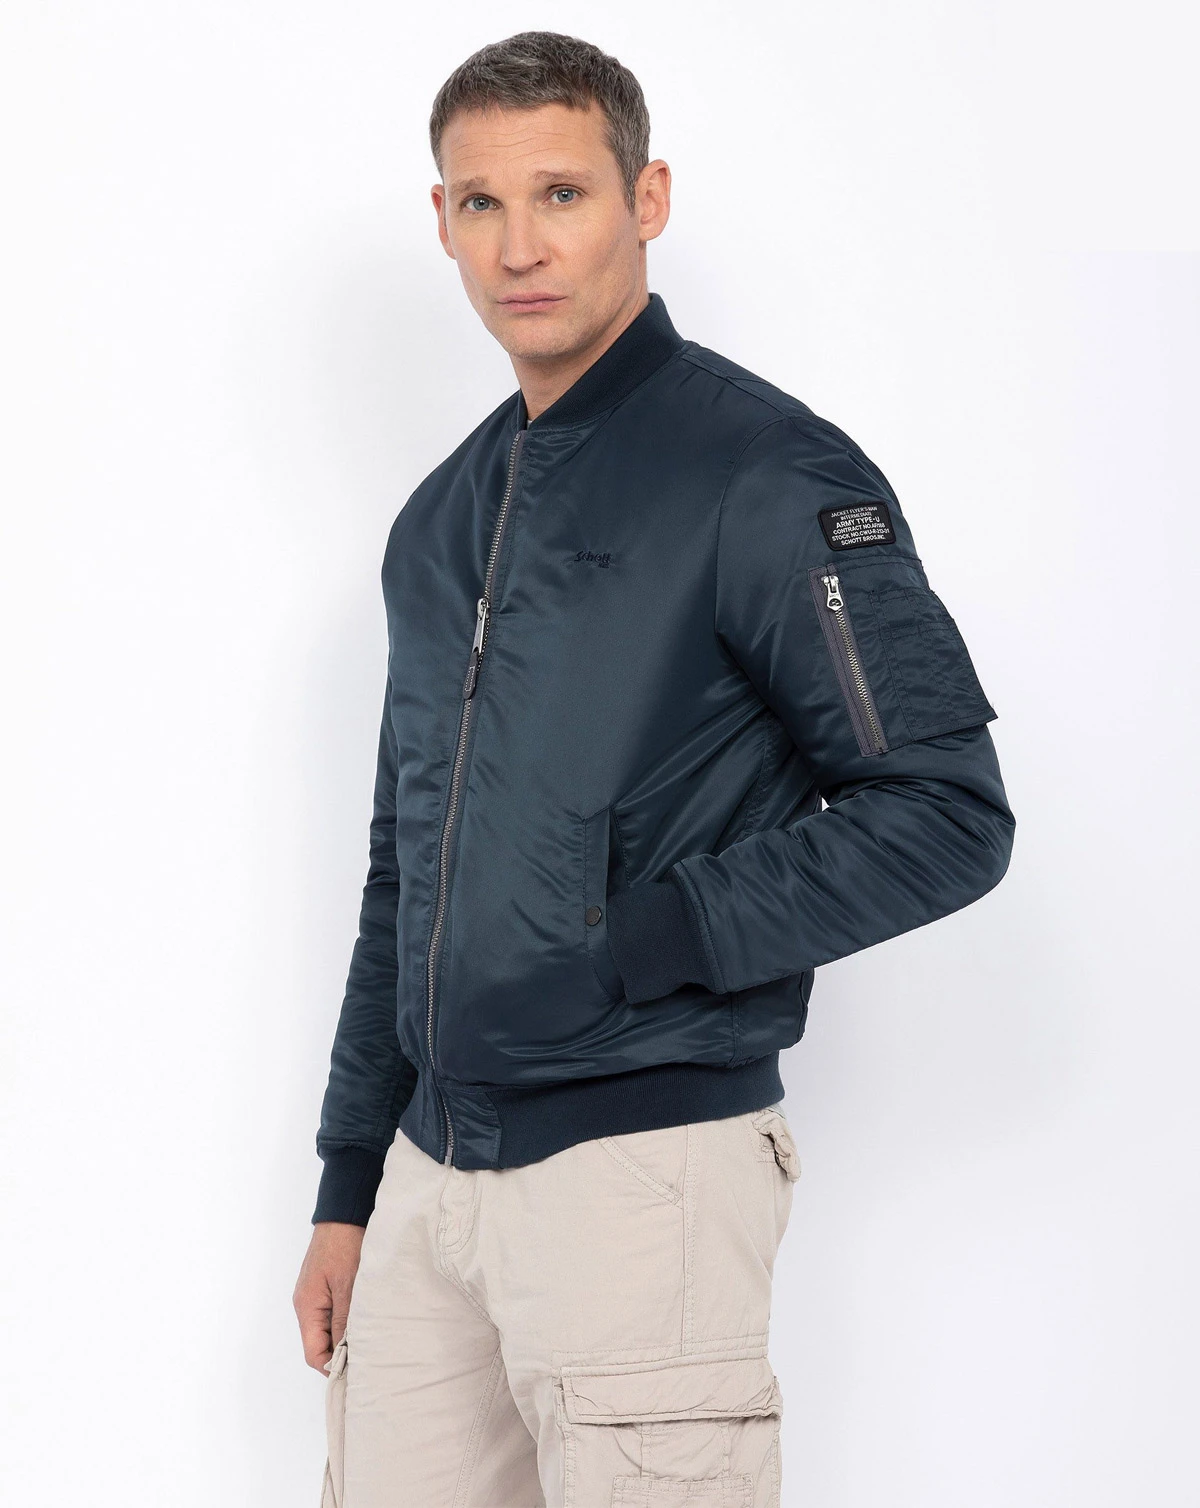 Bomber jacket for Men | New and old style bomber jackets | Army Star